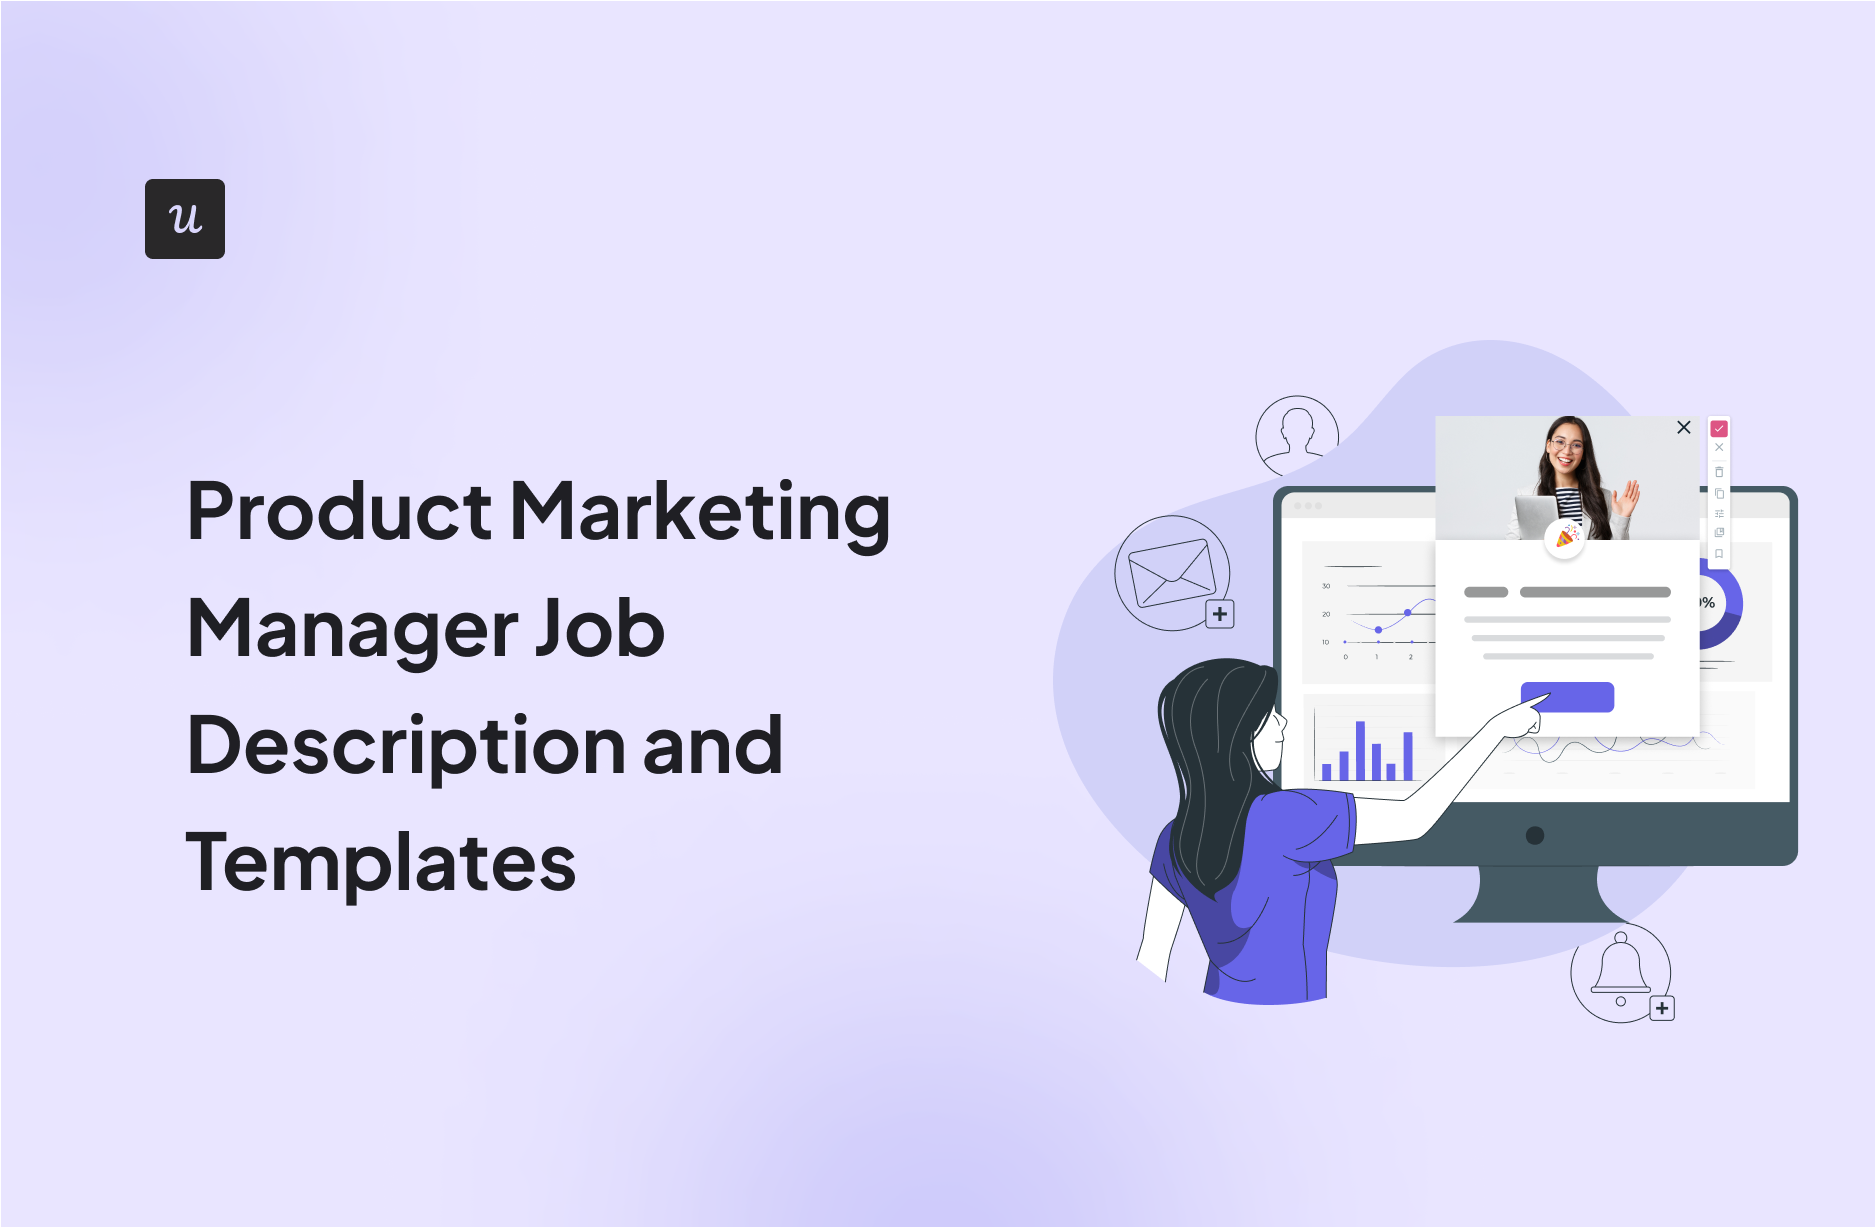 Product Marketing Manager Job Description and Templates